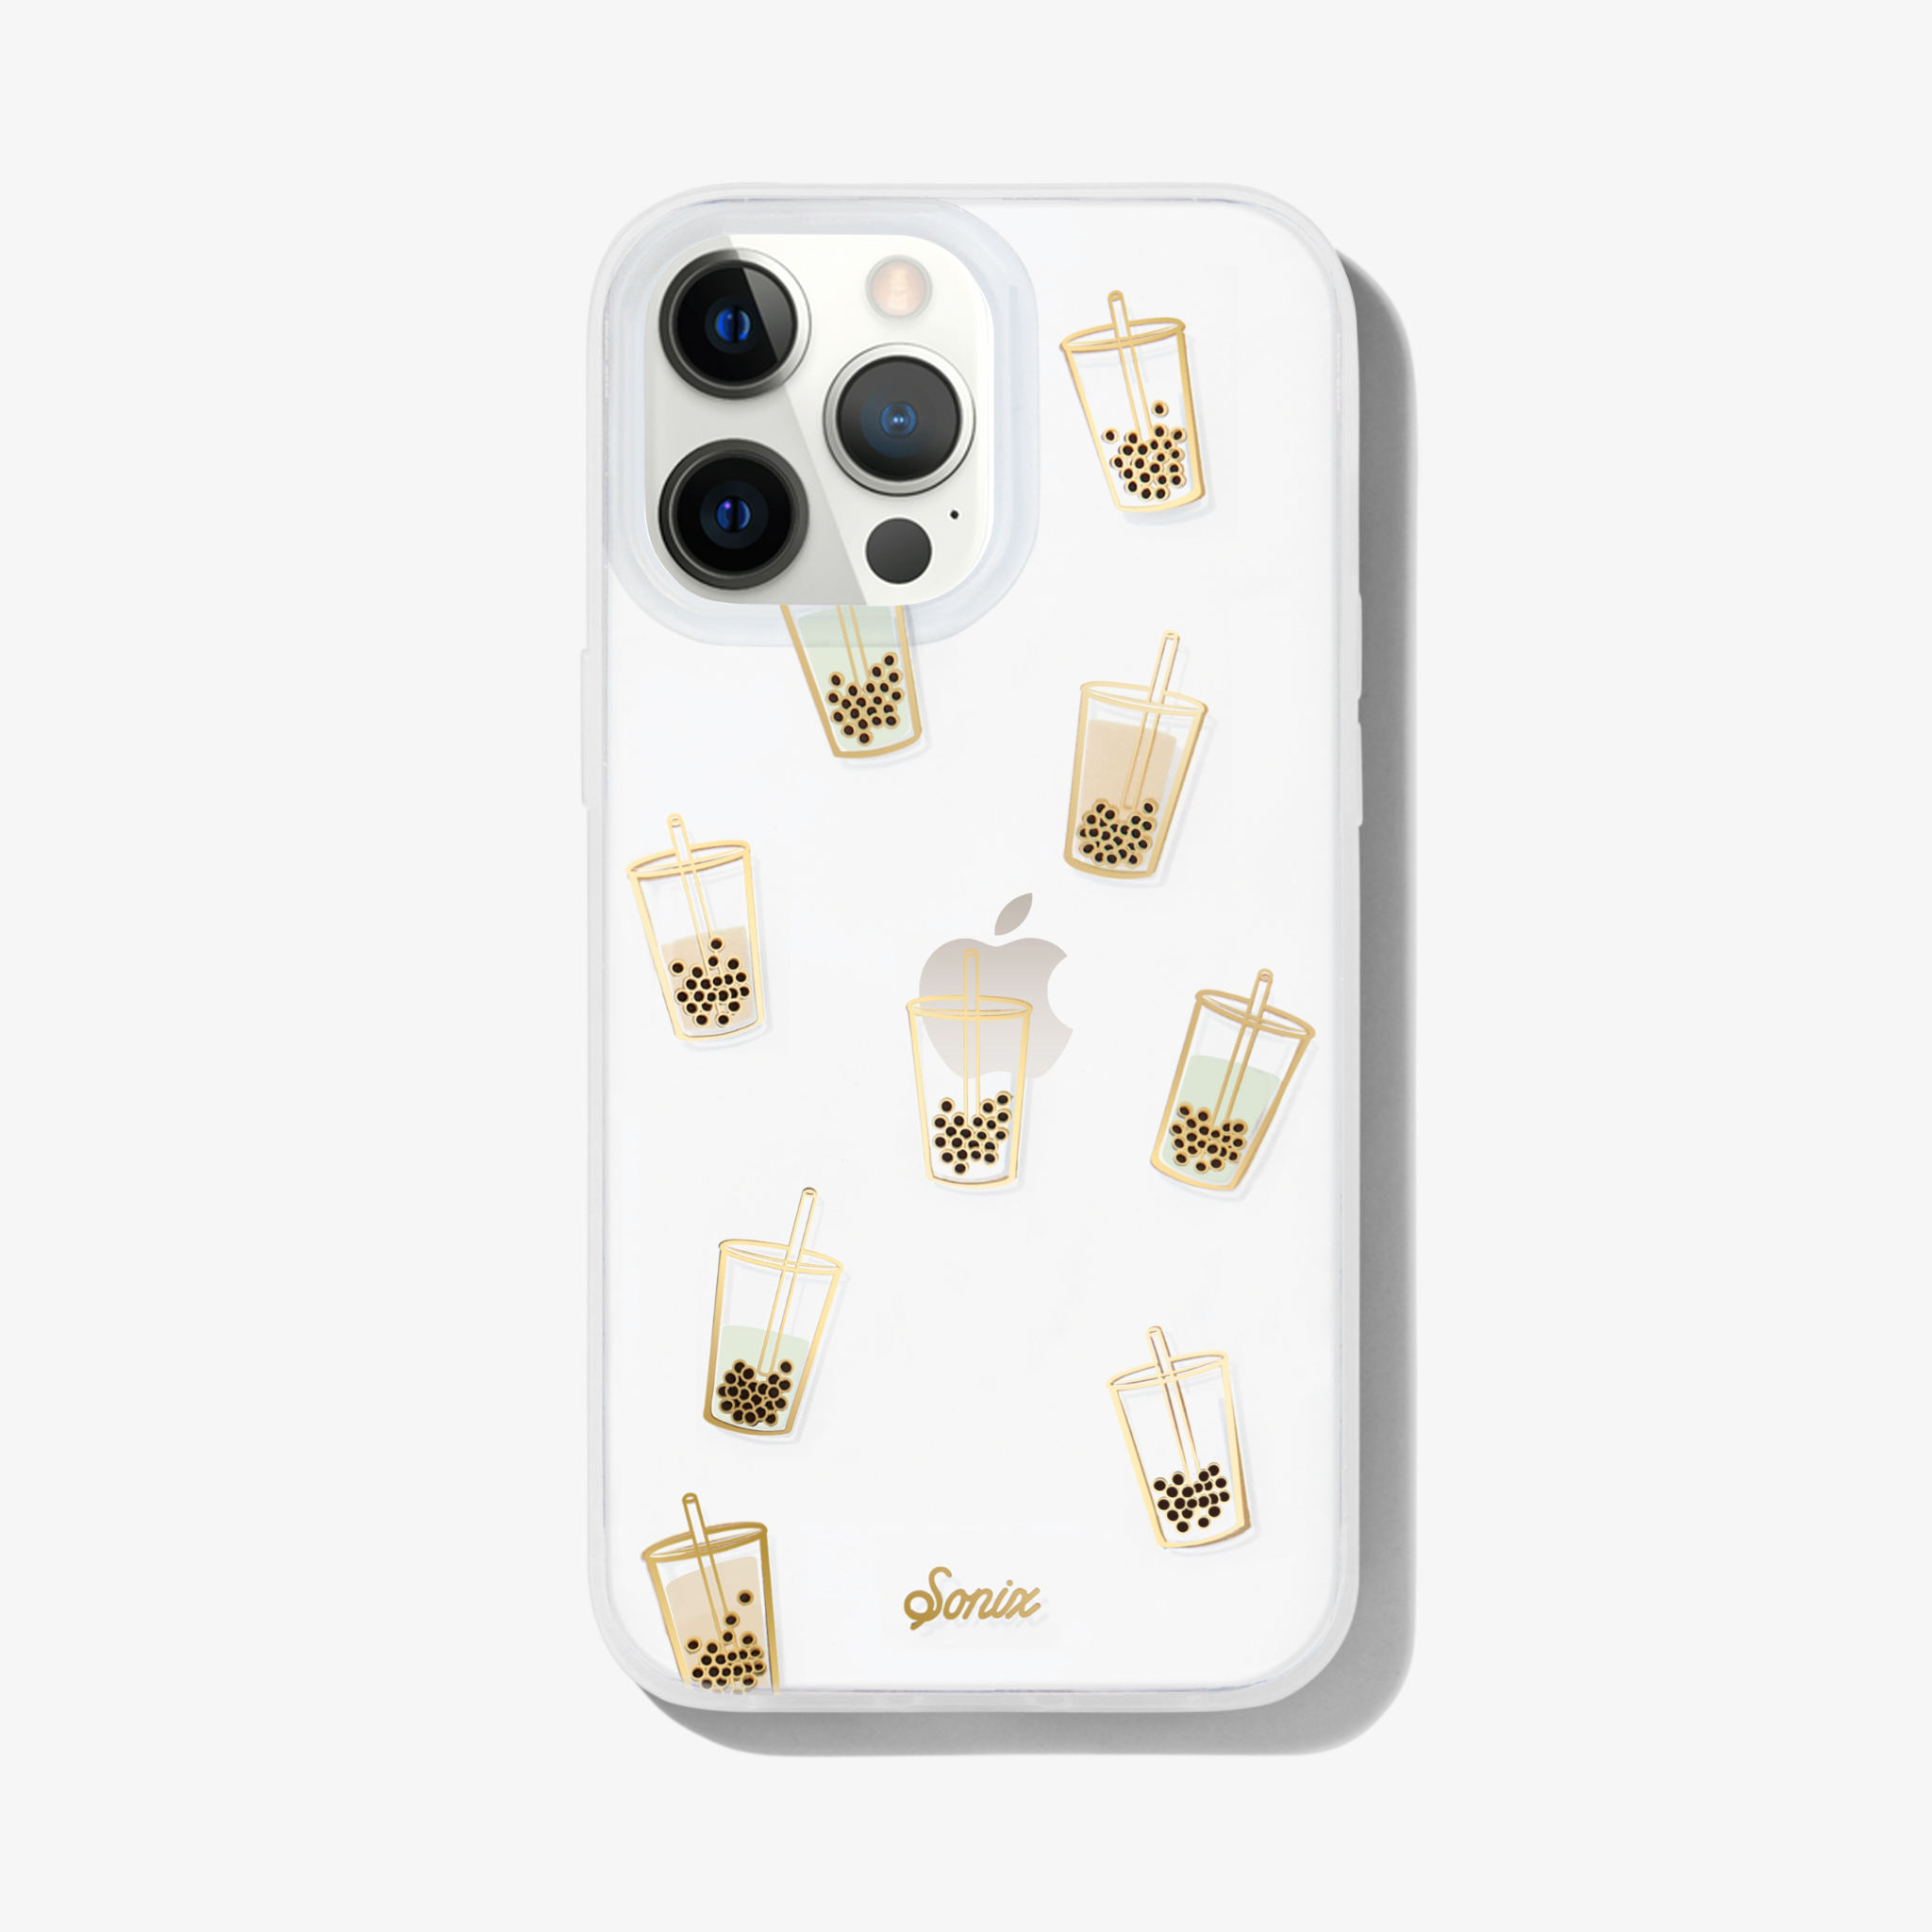 boba drink cups with gold foiling on a clear case shown on an iphone 13 pro max 